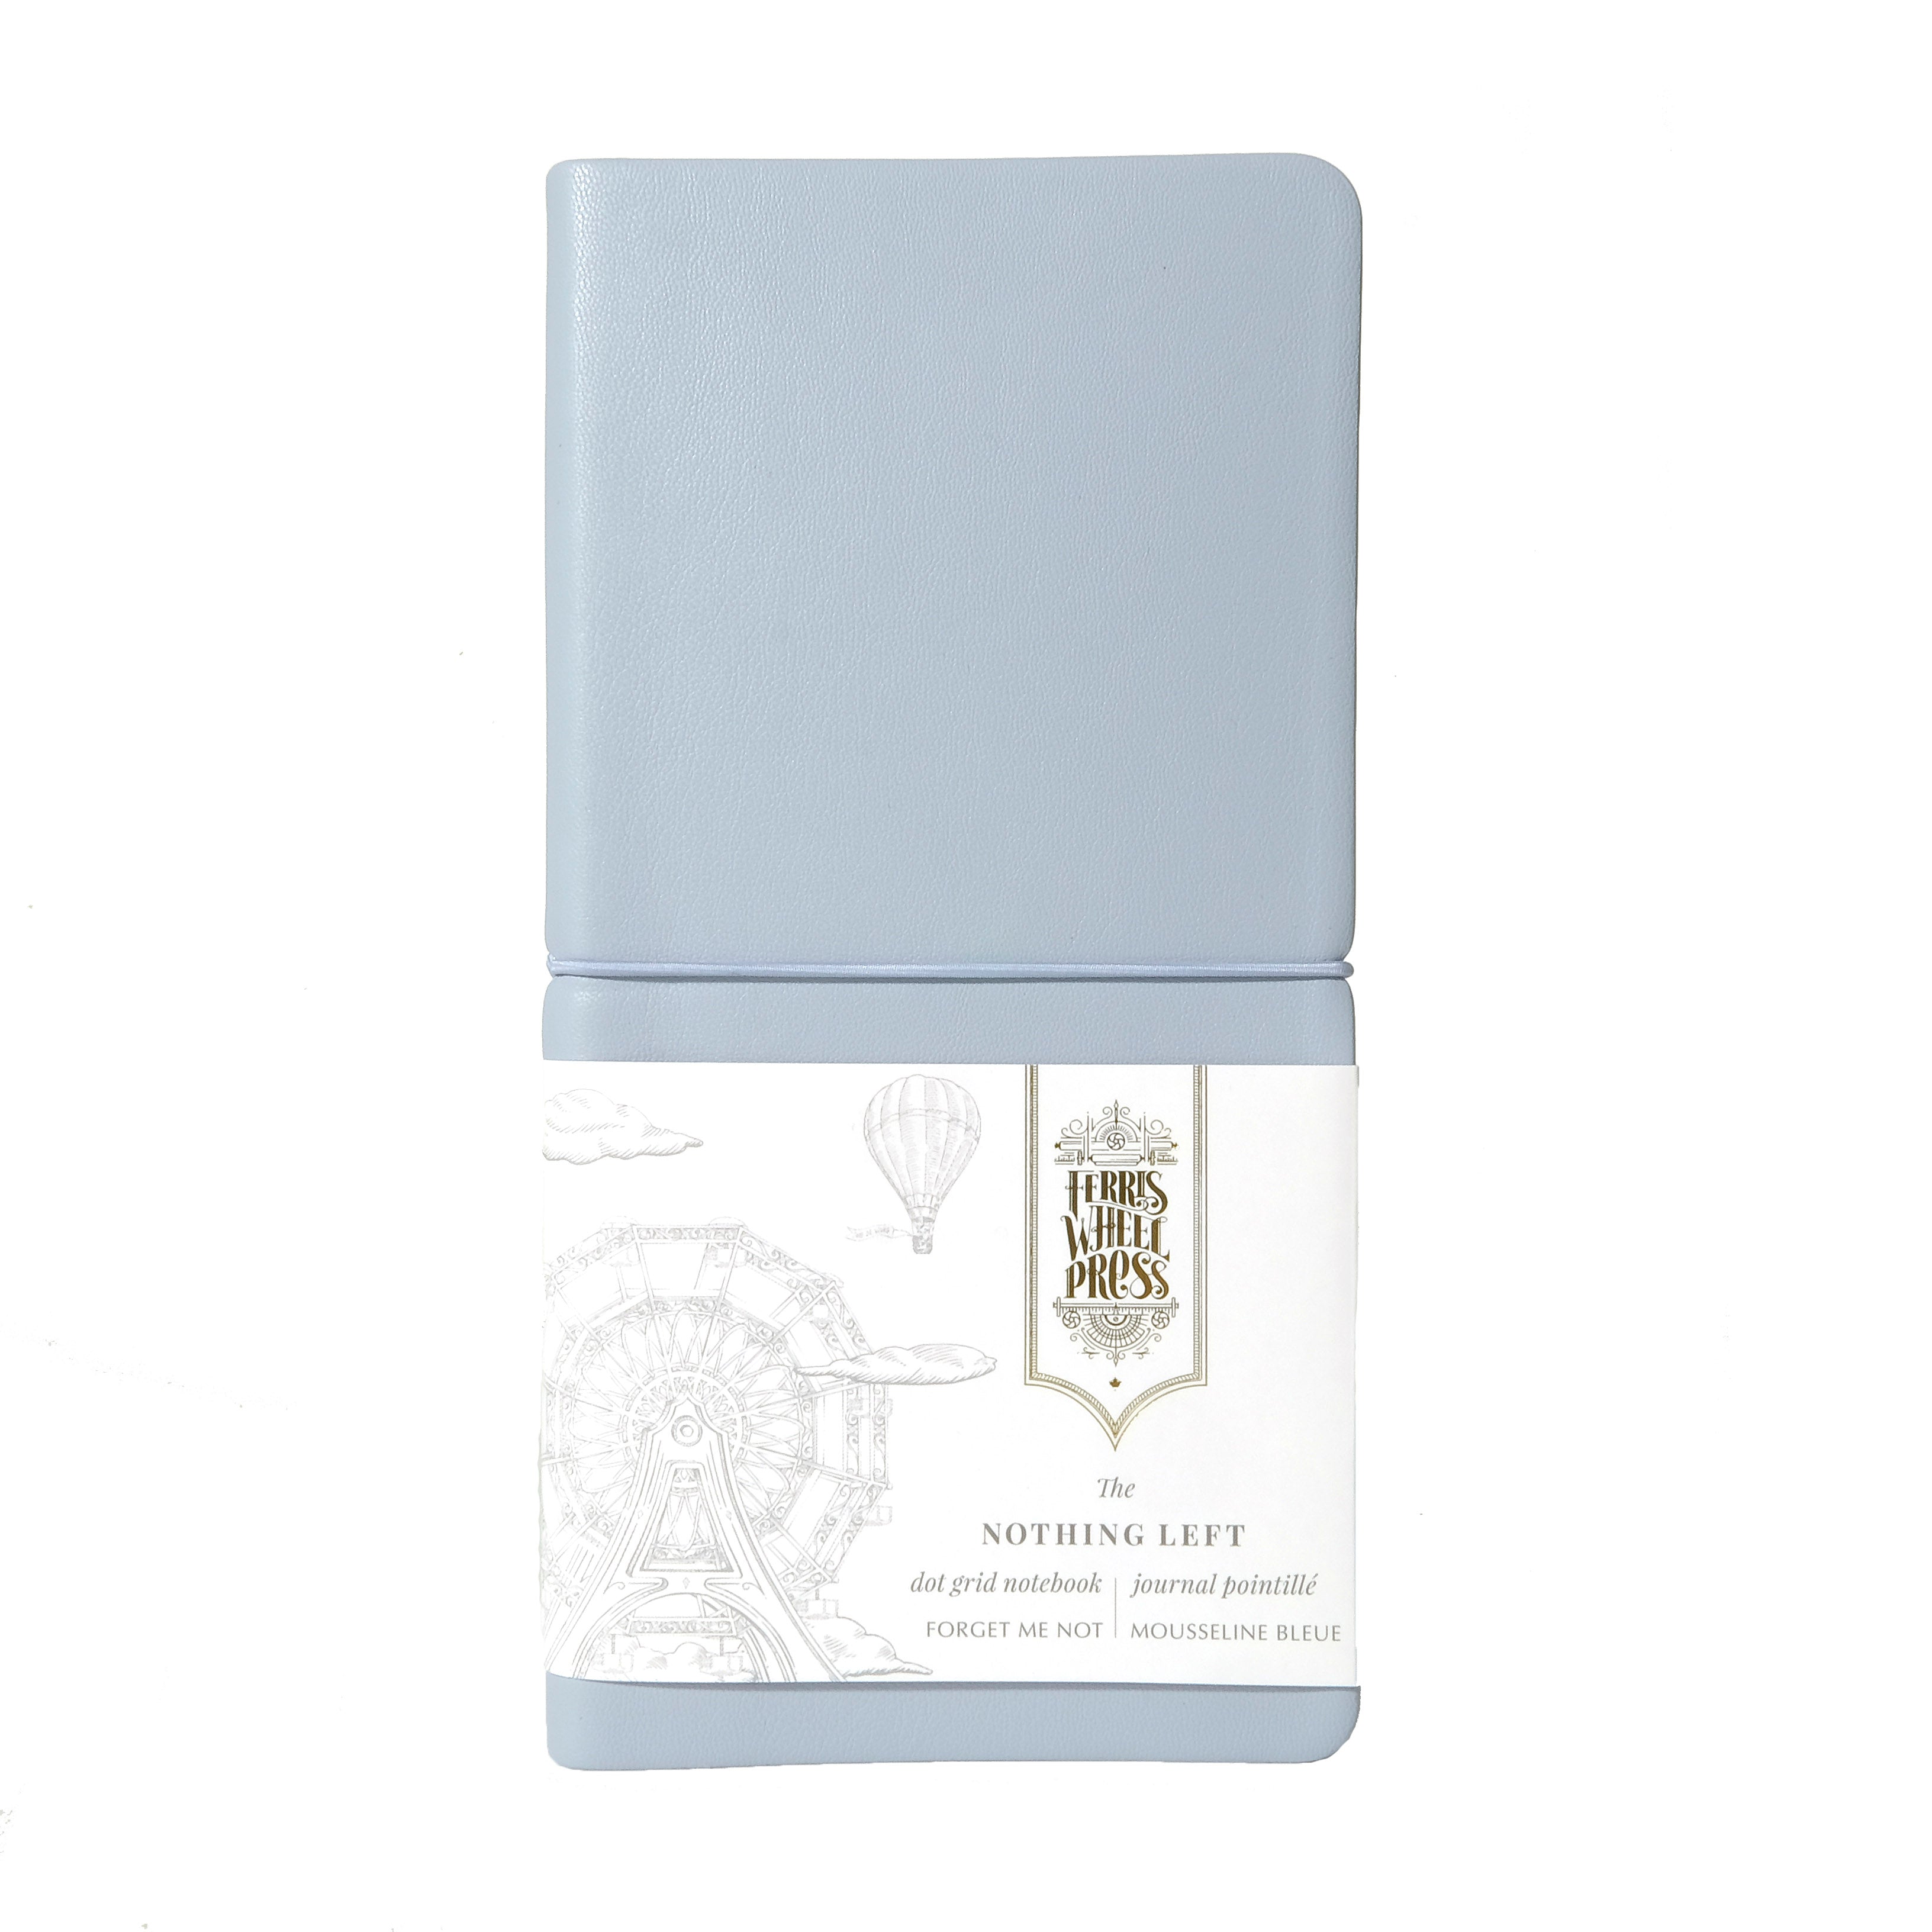 Ferris Wheel Press Forget Me Not Nothing Left Fether Dotted Notebook cover - Paper Kooka Australia